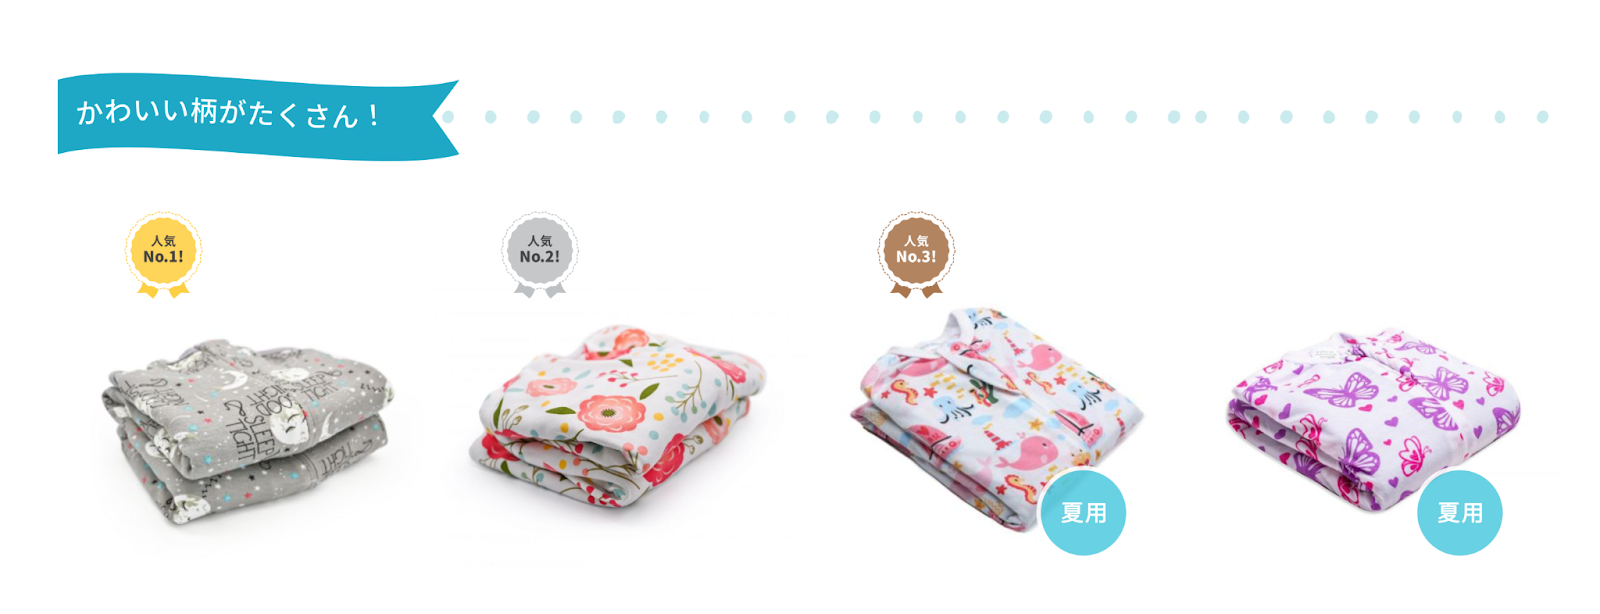 Humble Bunny case study for Sleeping Baby Japan brand development best sellers badges